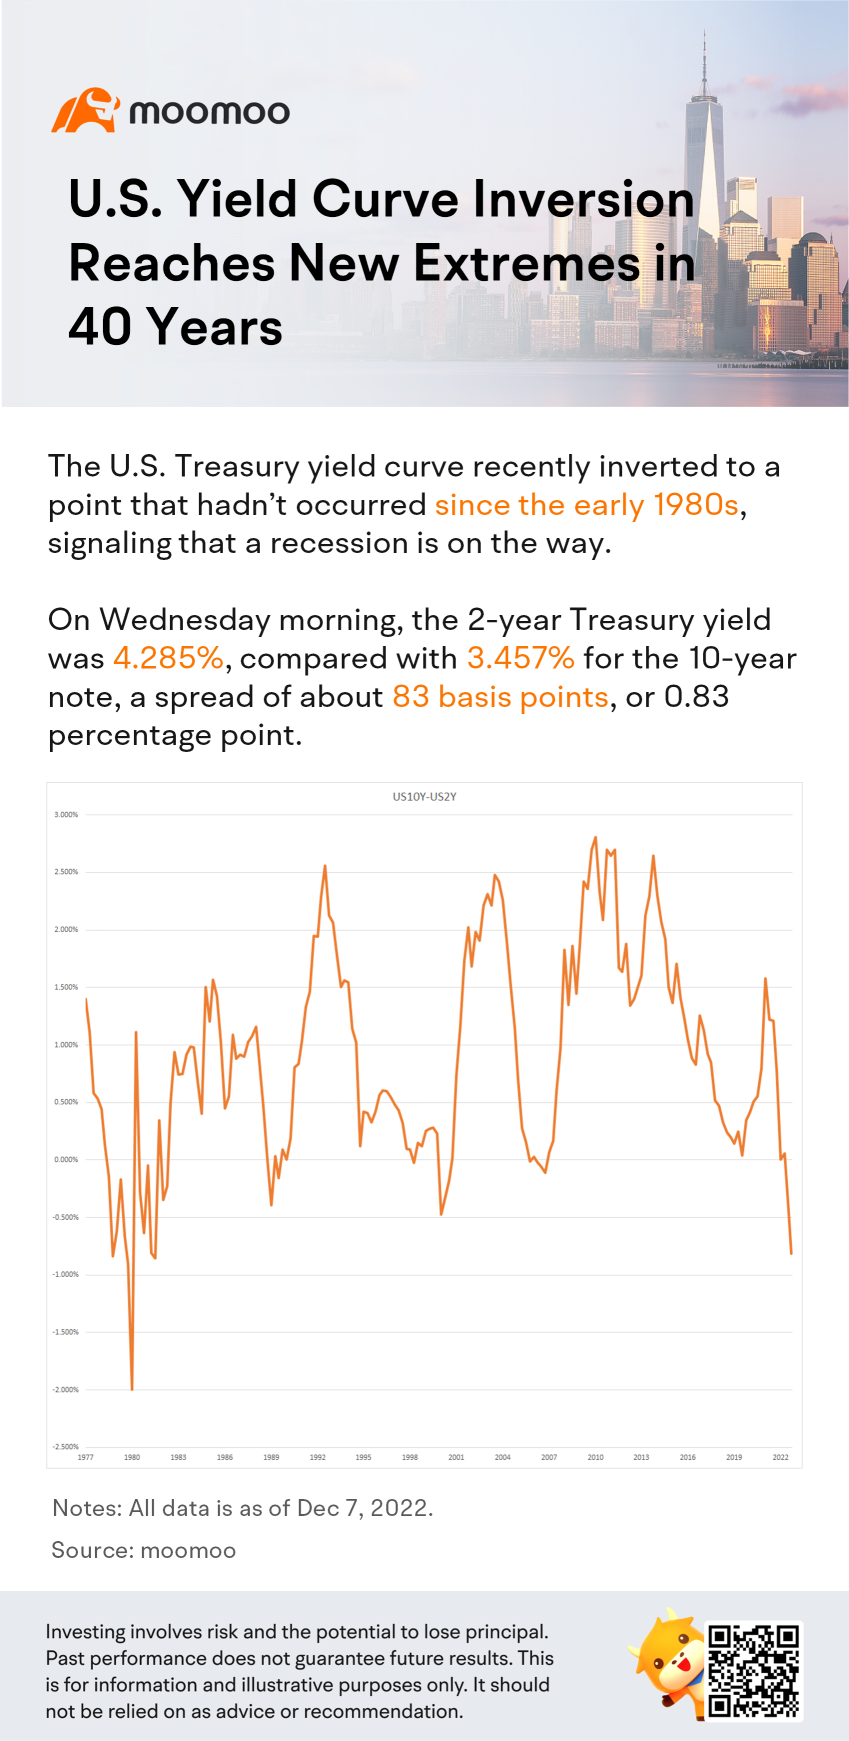 U.S. Yield Curve Inversion Reaches New Extremes in 40 Years